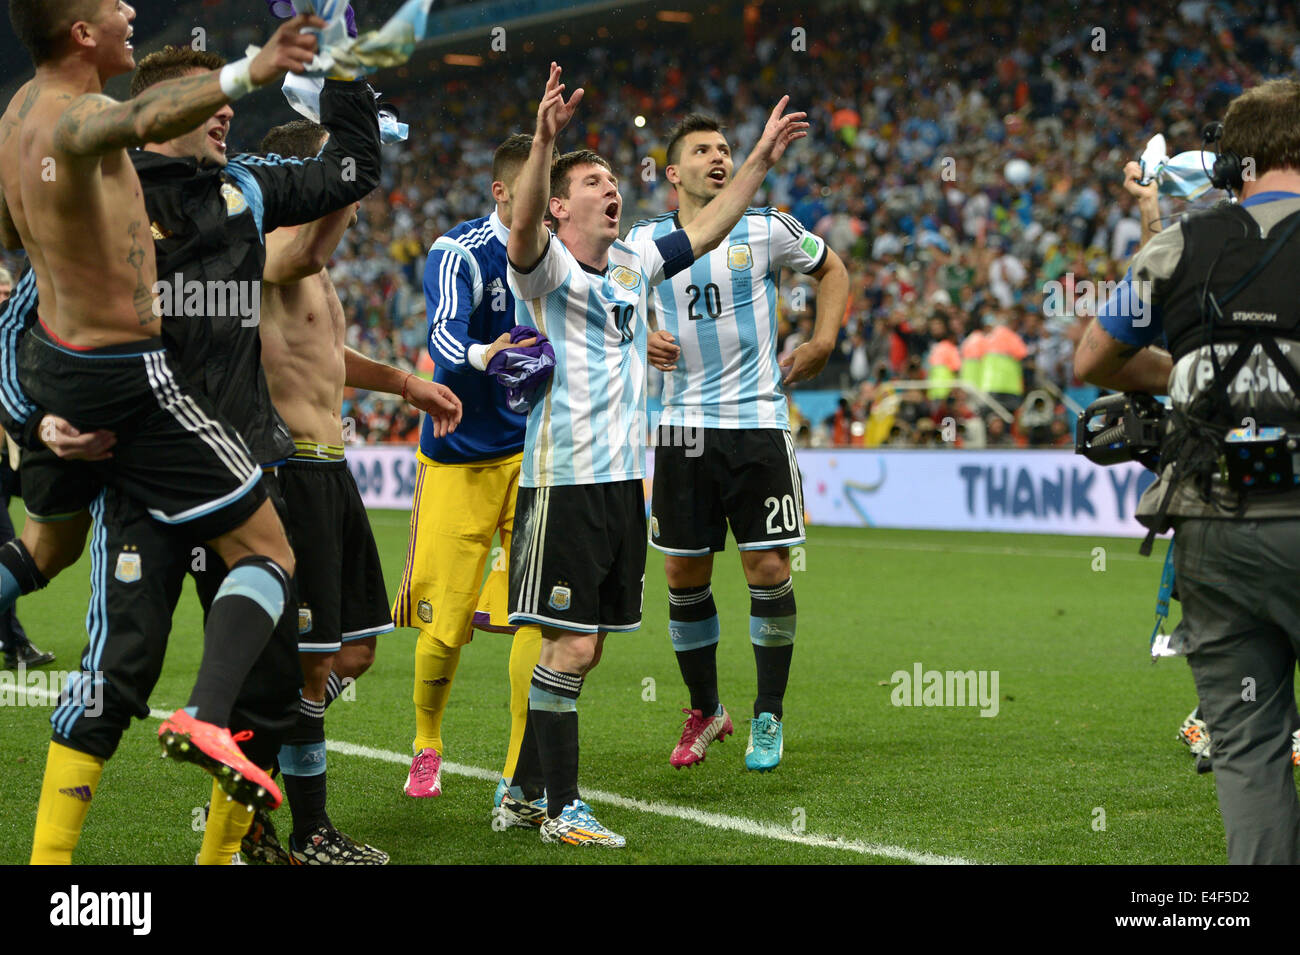 Sao Paulo Brazil. 9th July, 2014. Lionel Messi, Sergio Aguero (ARG), JULY 9, 2014 - Football/Soccer : Lionel Messi (10) and Sergio Aguero (20) of Argentina celebrate after winning the FIFA World Cup 2014 semi-finals match between Netherlands and Argentina at Arena de Sao Paulo in Sao Paulo Brazil. Credit:  FAR EAST PRESS/AFLO/Alamy Live News Stock Photo